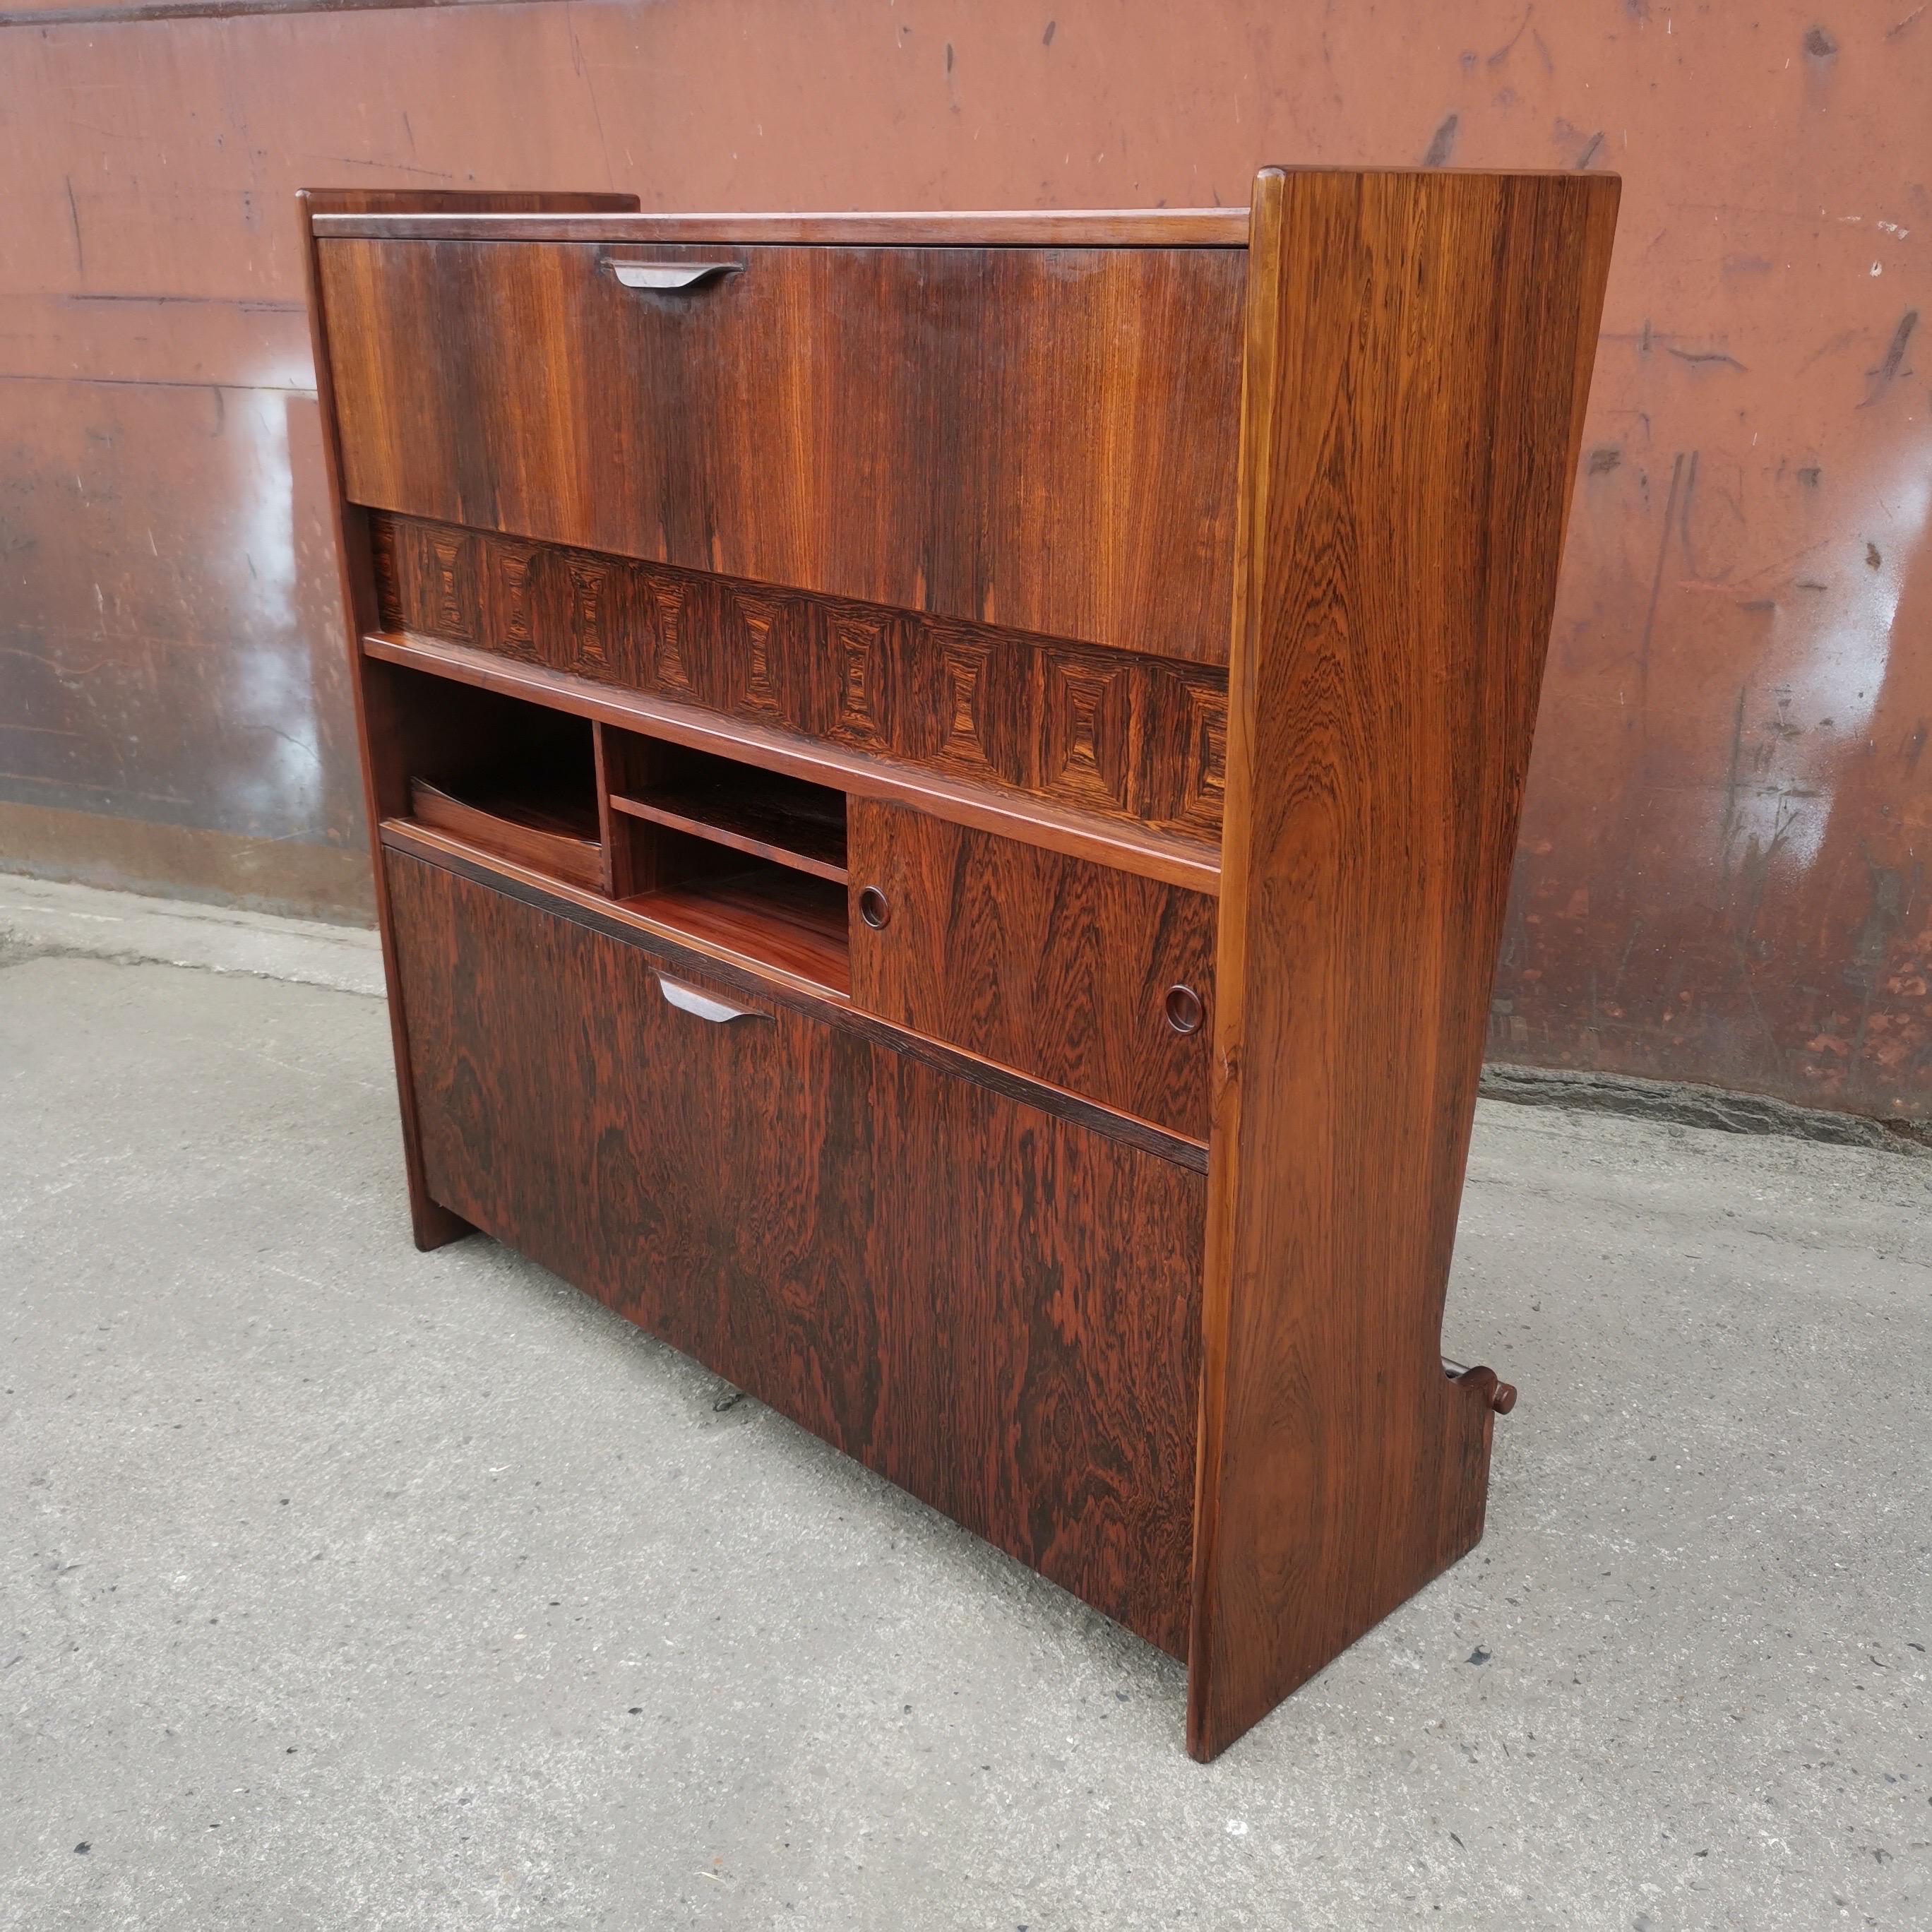 Danish designer Johannes Andersen created a functional yet decorative bar cabinet executed in rosewood. The closed front has a footrest whereas the functional side features various storage spaces. On top gives a downwards opening door access to a